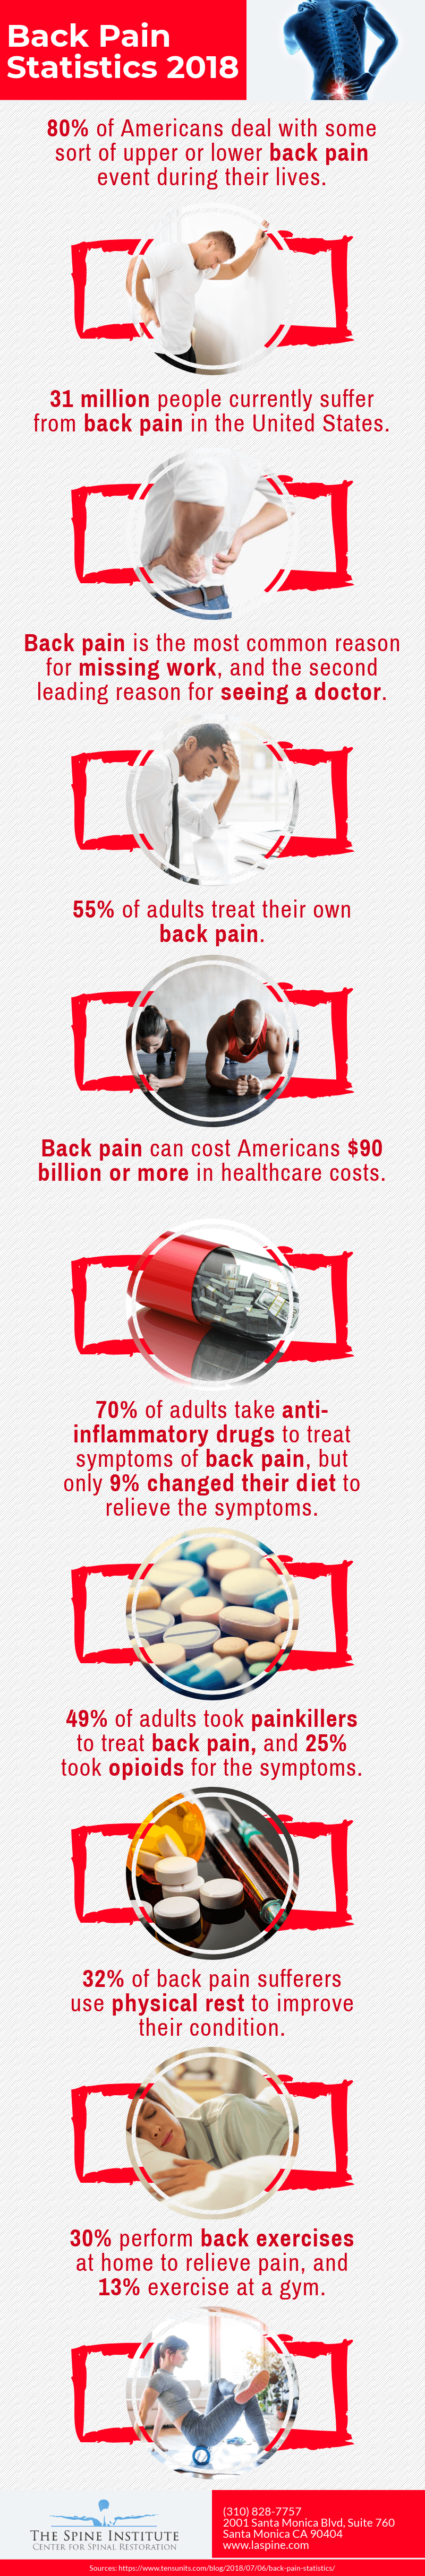 Statistics Related to Back Pain from 2018